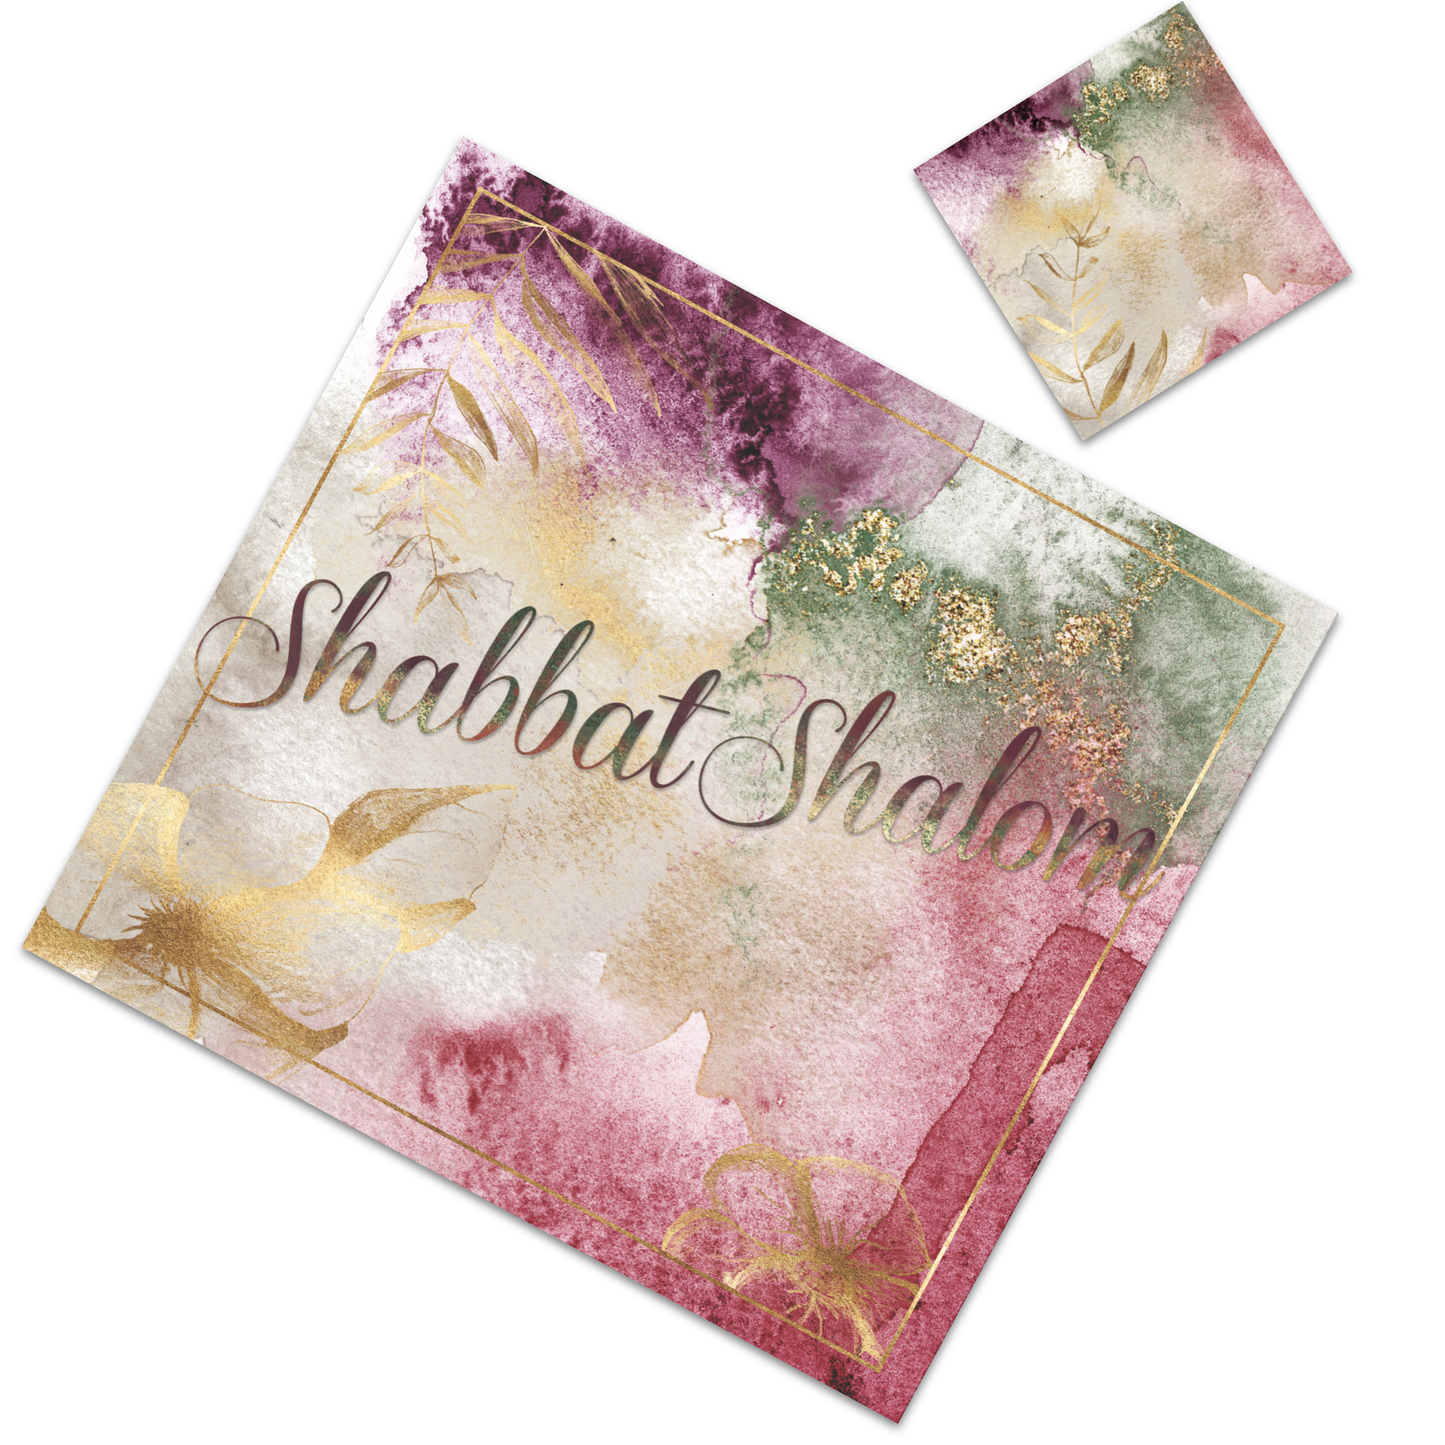 Brighten your Shabbat table with this beautiful watercolor placemat  Disposable square paper place-mats with matching coasters.  Printed on heavy glossy card stock.   Set of 12  Size 13.5" x 12.25"